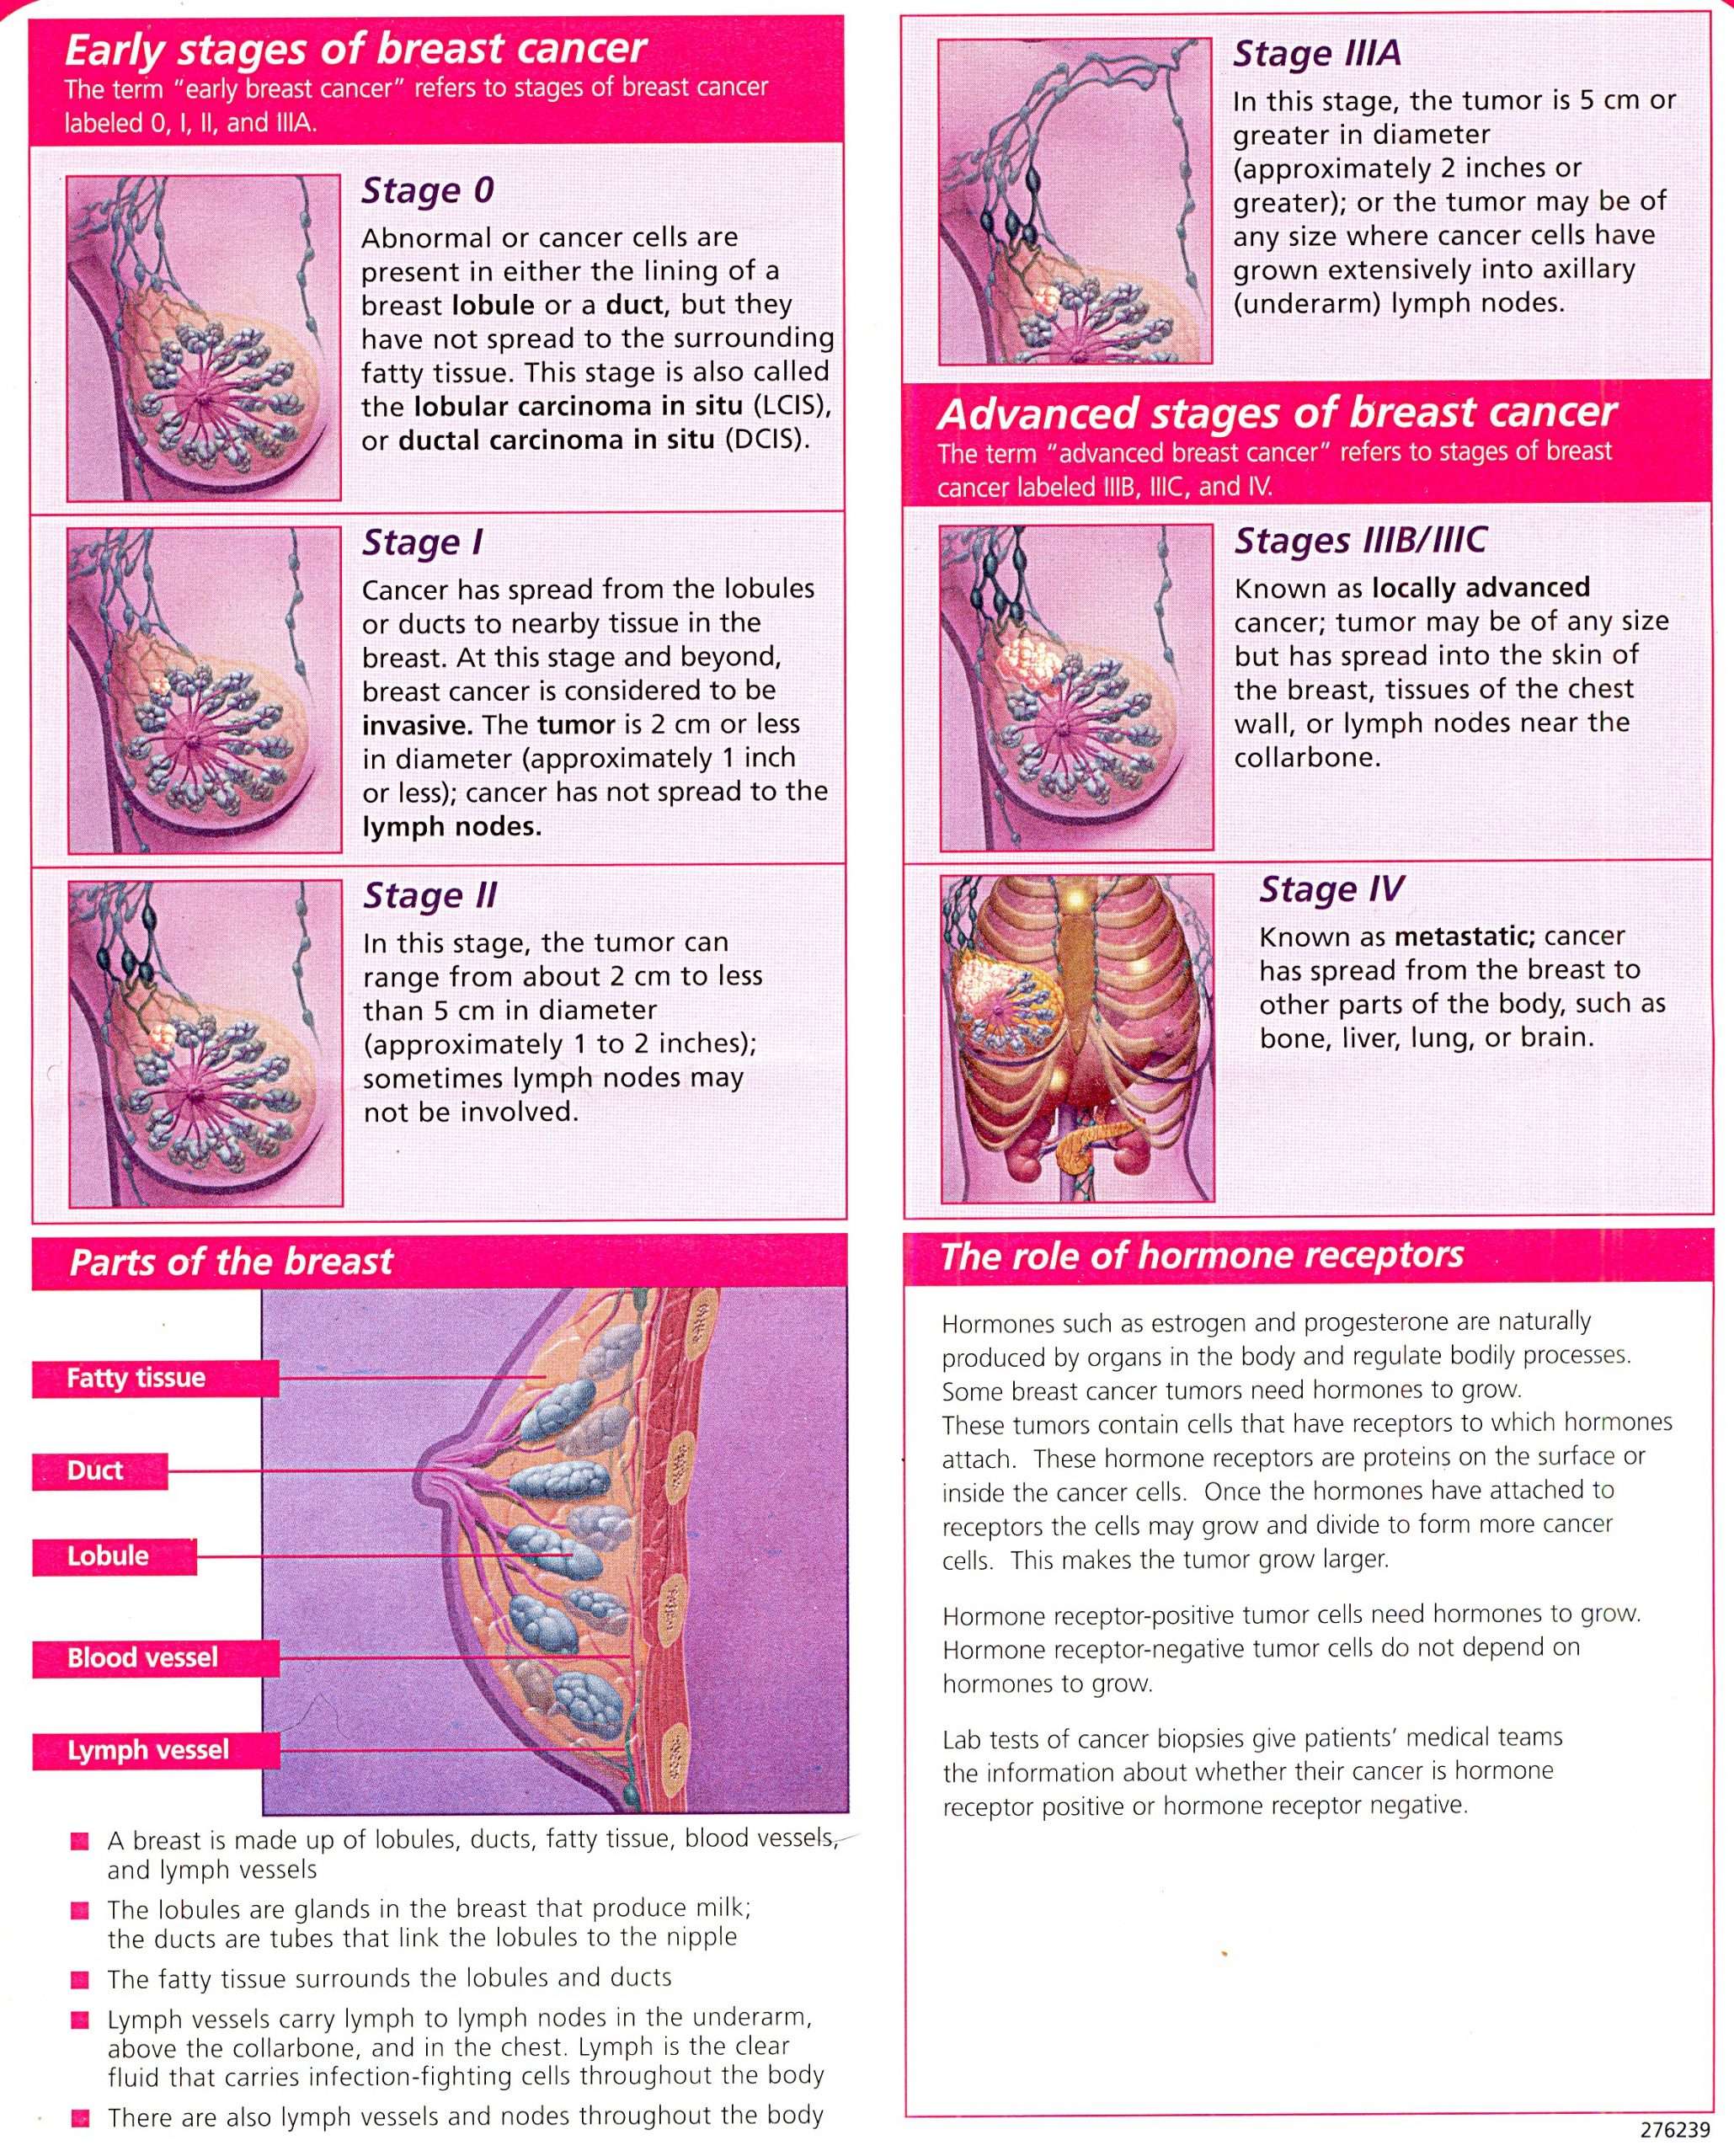 Visual Guide to The Stages of Breast Cancer